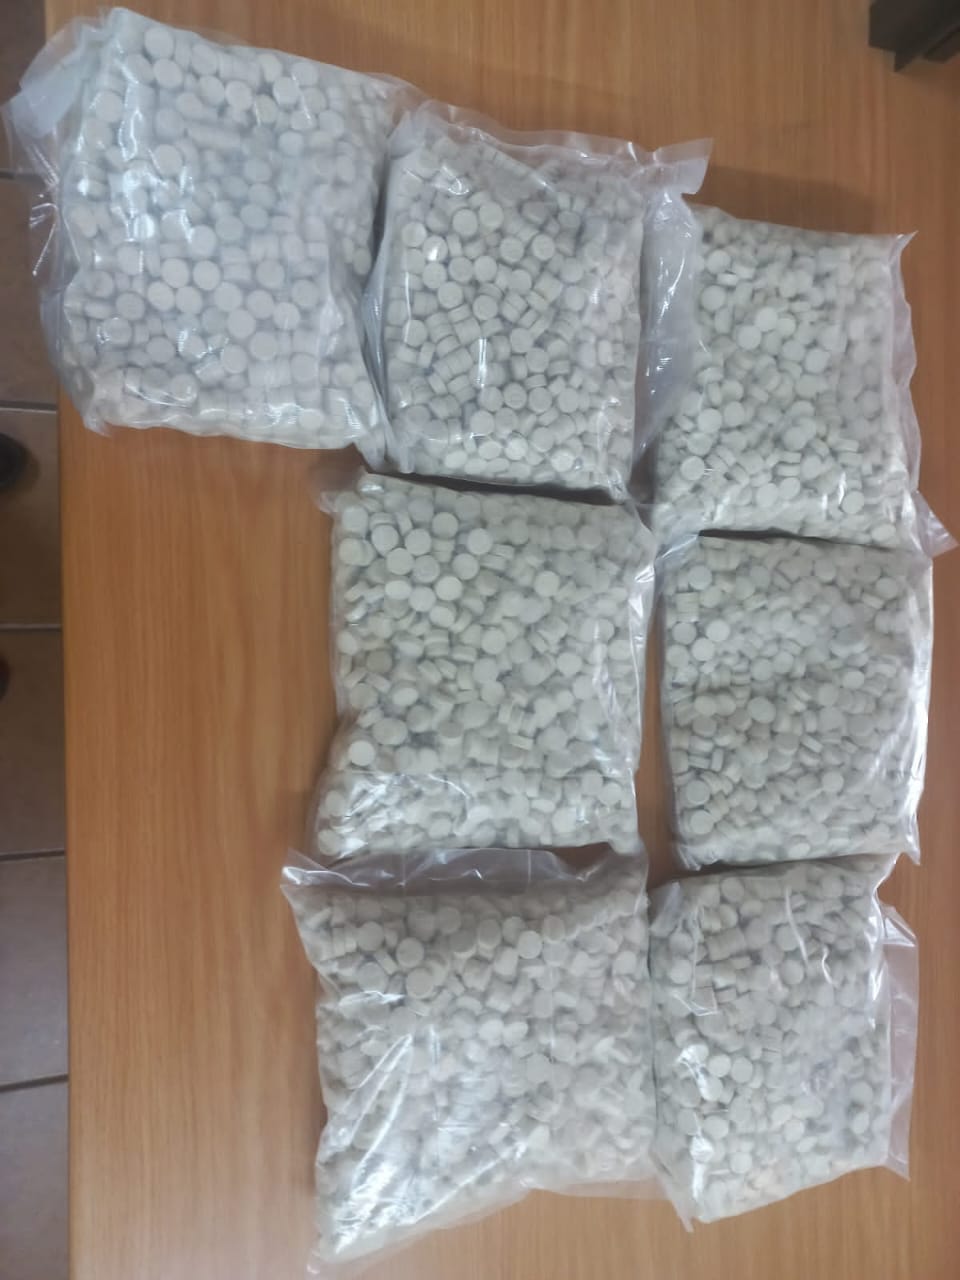 SAPS confiscation drugs estimated at R660 000 in the Central Karoo District